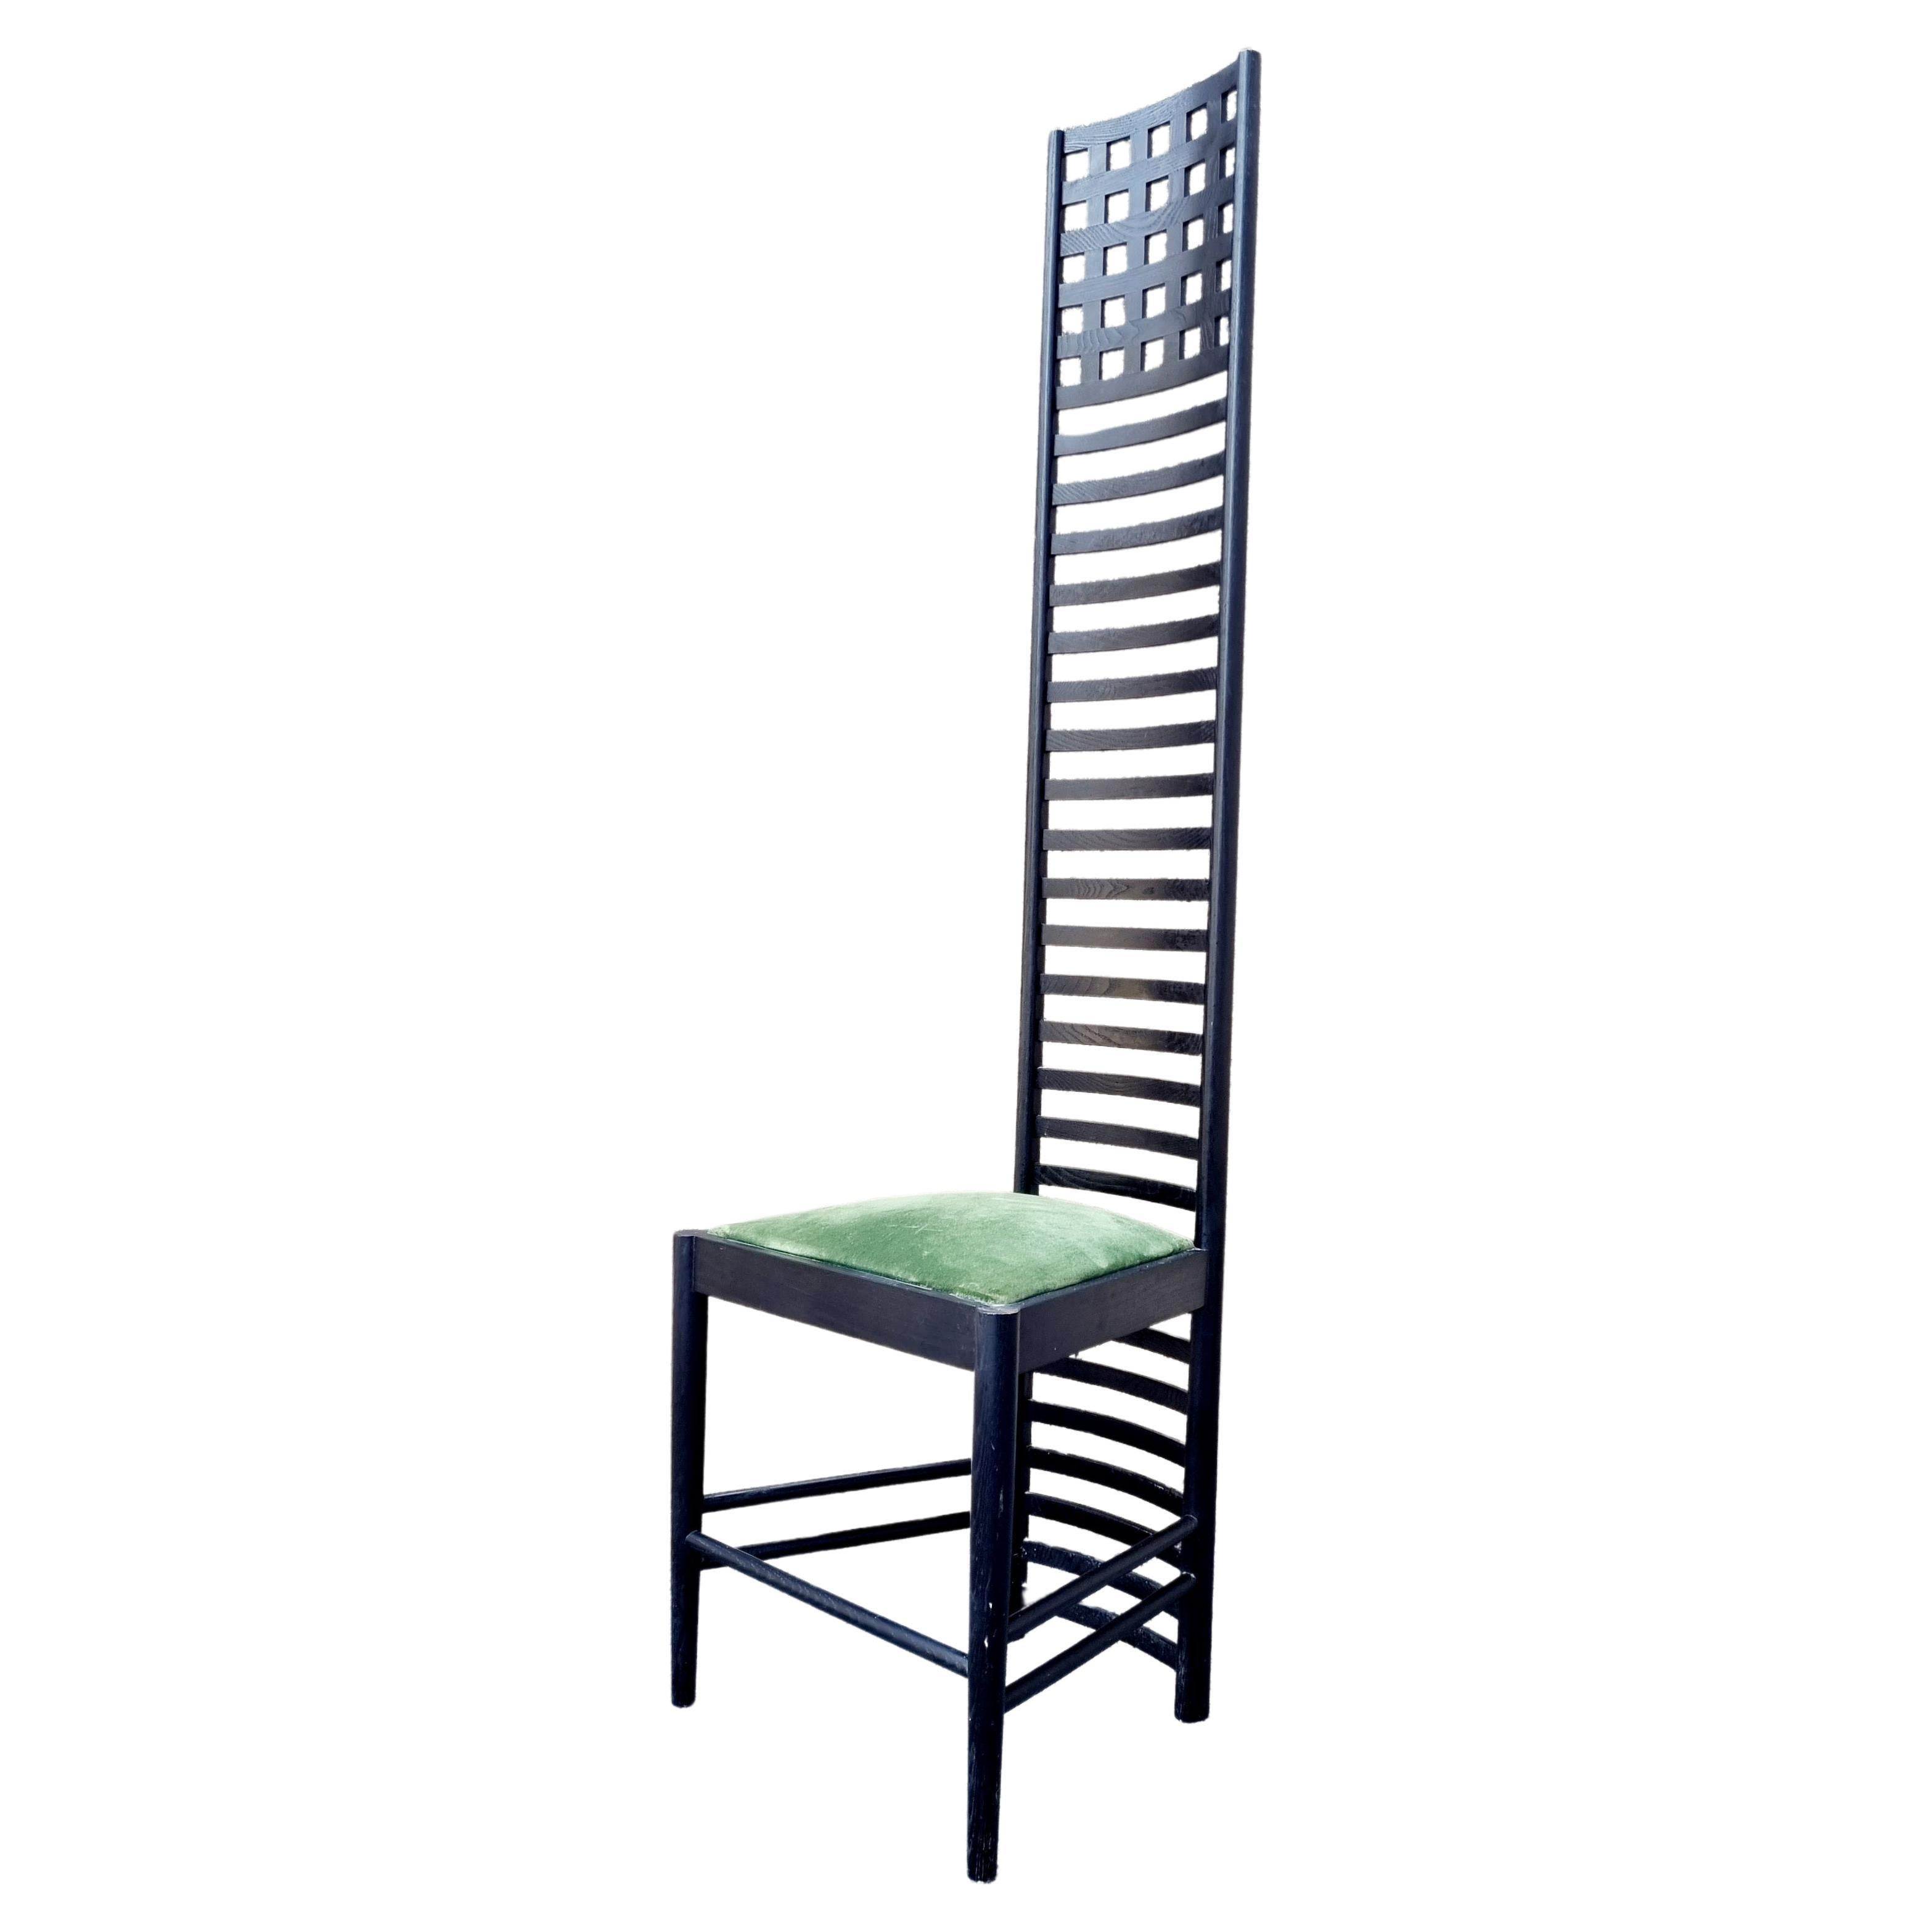 Hill House Chair by Charles Rennie Mackintosh for Cassina, Italy 70s